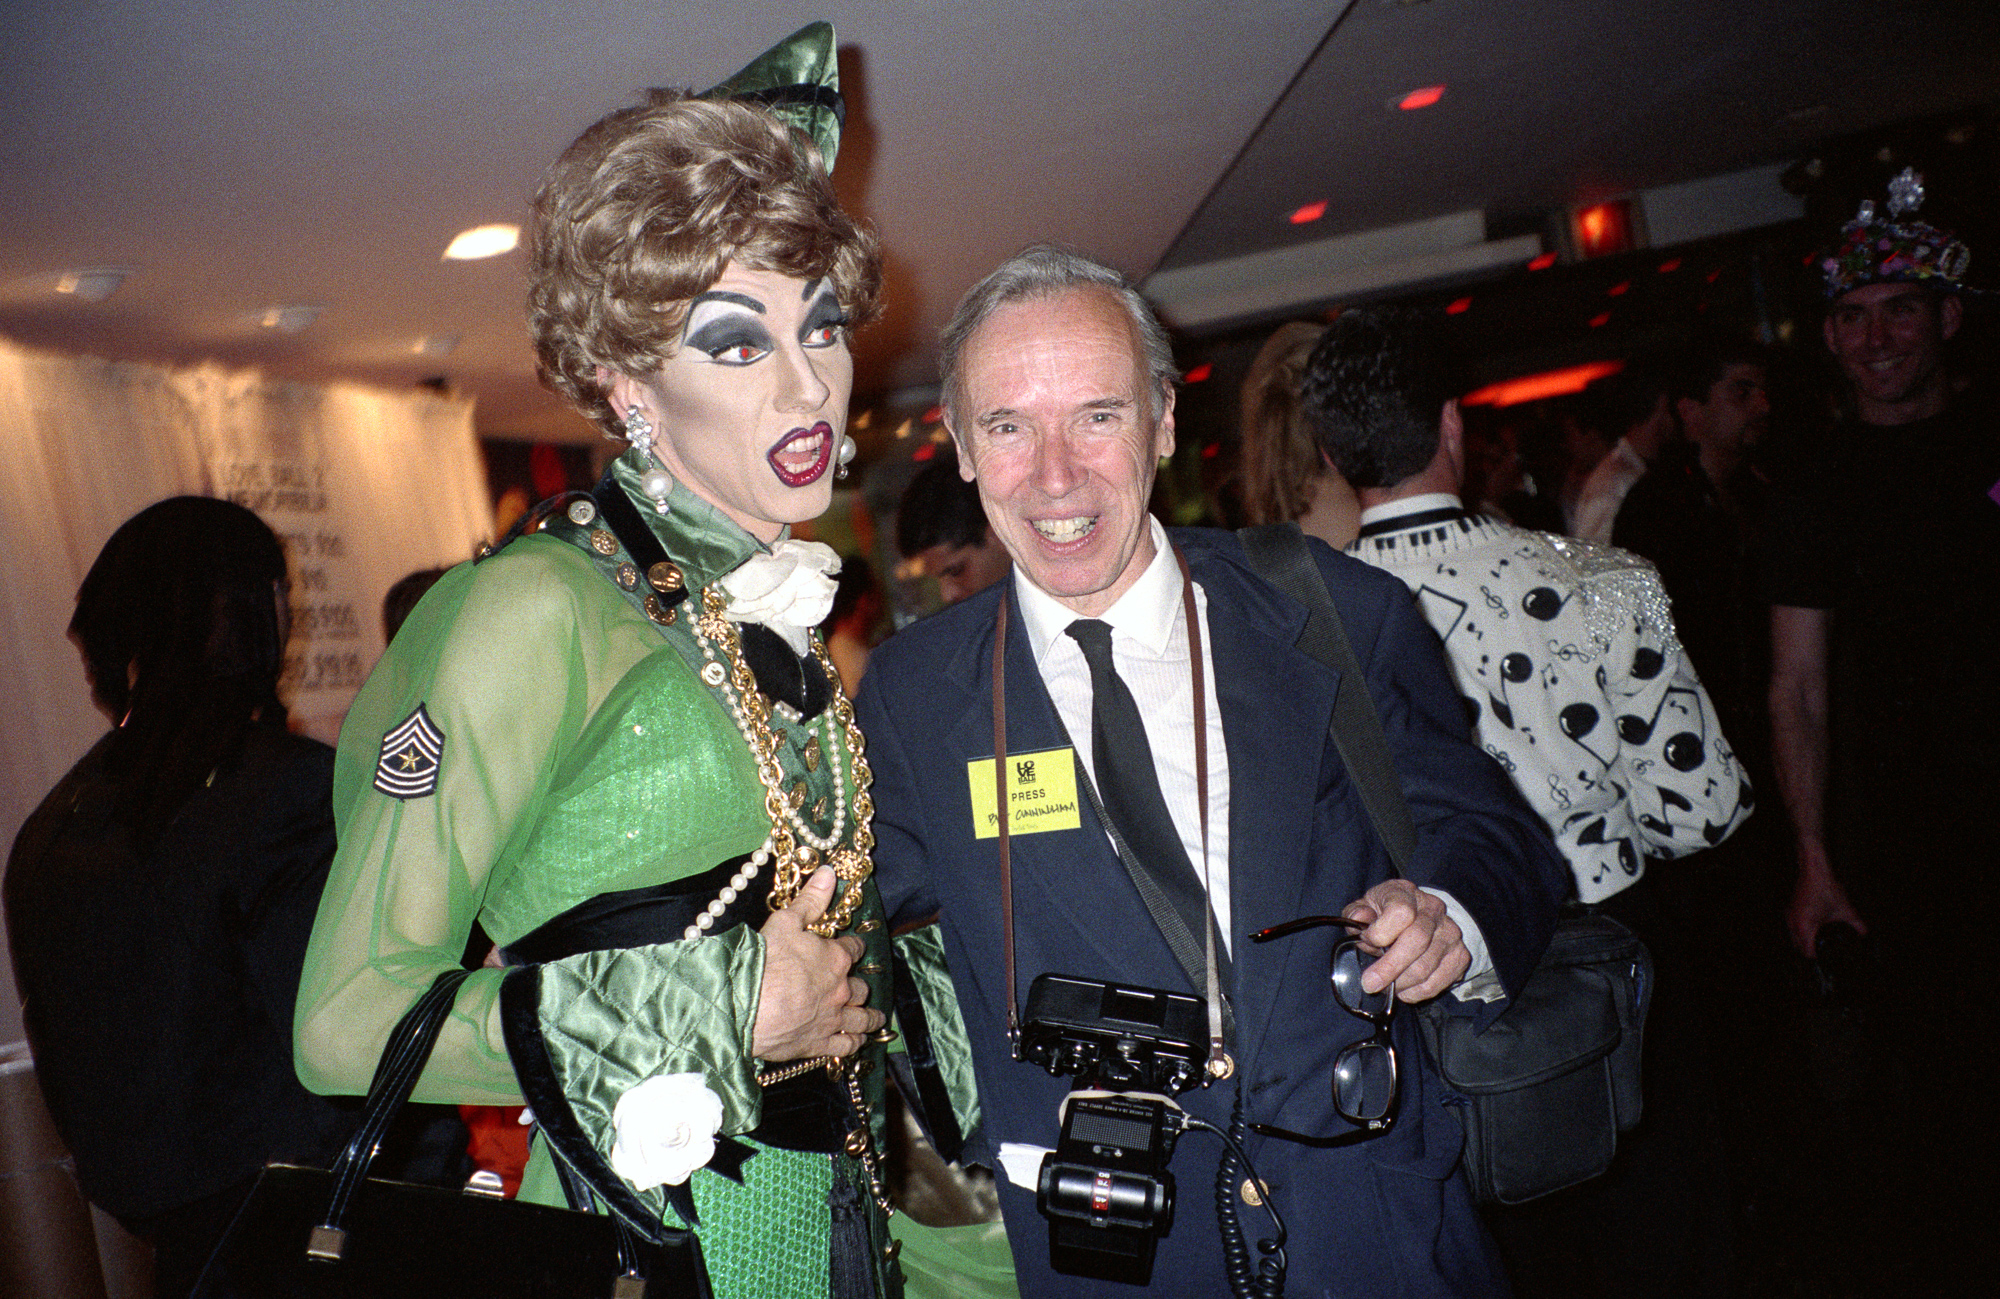  Performance artist John Epperson, AKA Lypsinka, with photographer Bill Cunningham at the Love Ball, Susanne Bartsch’s benefit for the Design Industries Foundation for AIDS. (1989) 